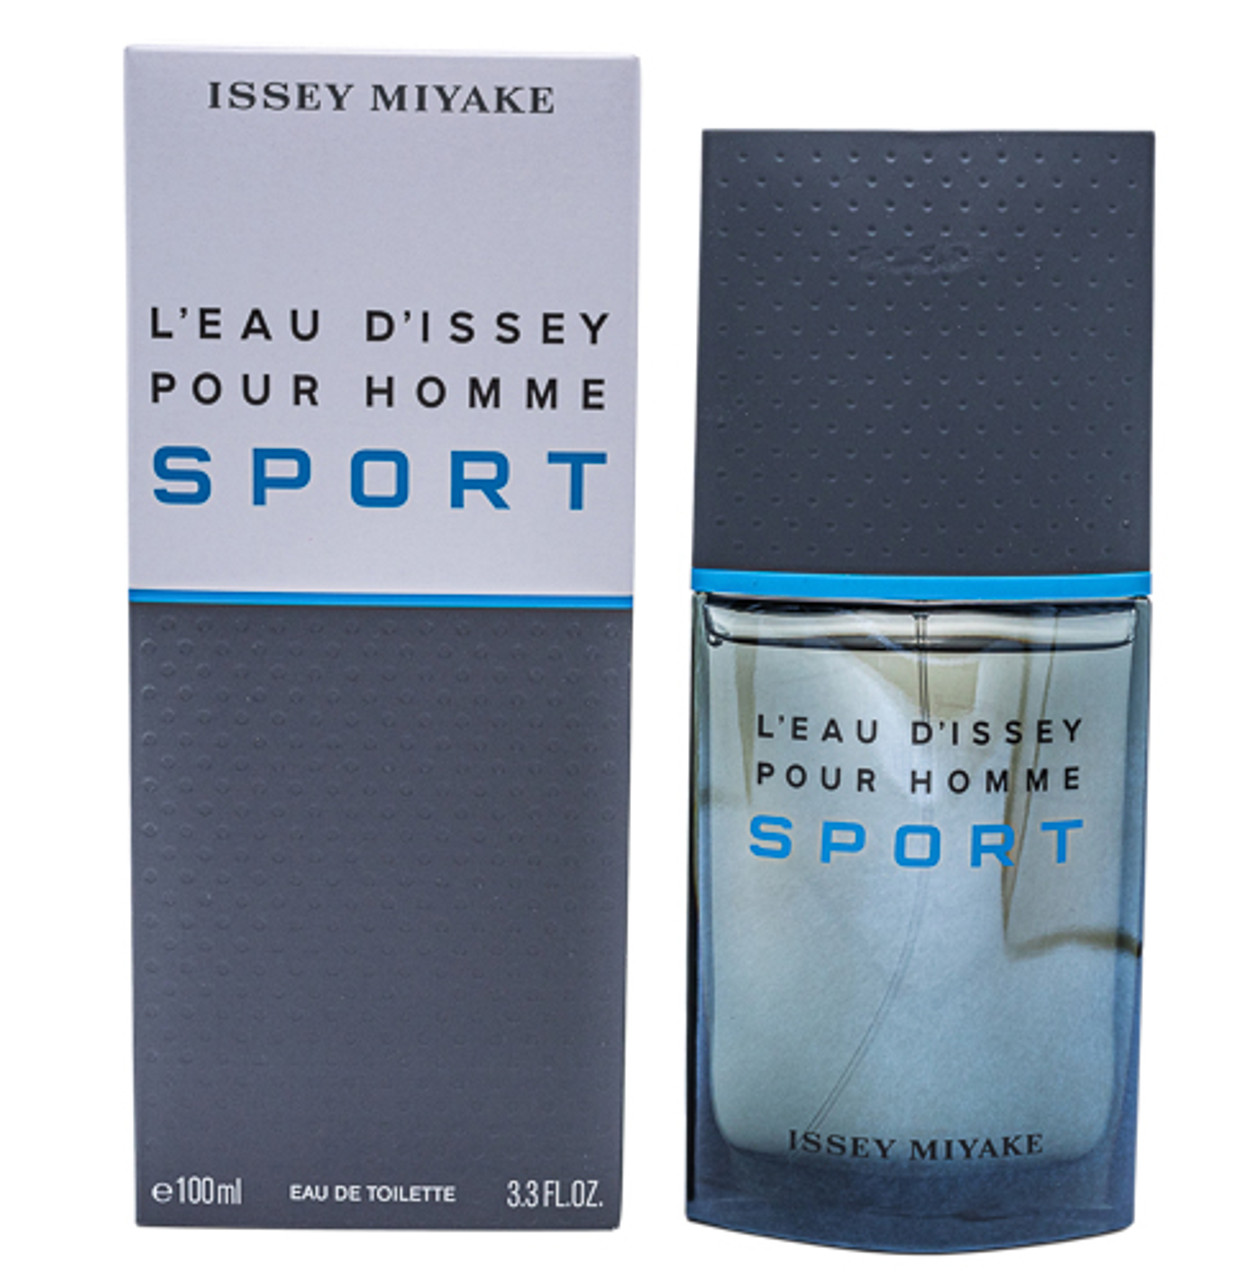 L'eau Bleue by Issey Miyake 4.2 oz EDT for Men Tester - ForeverLux